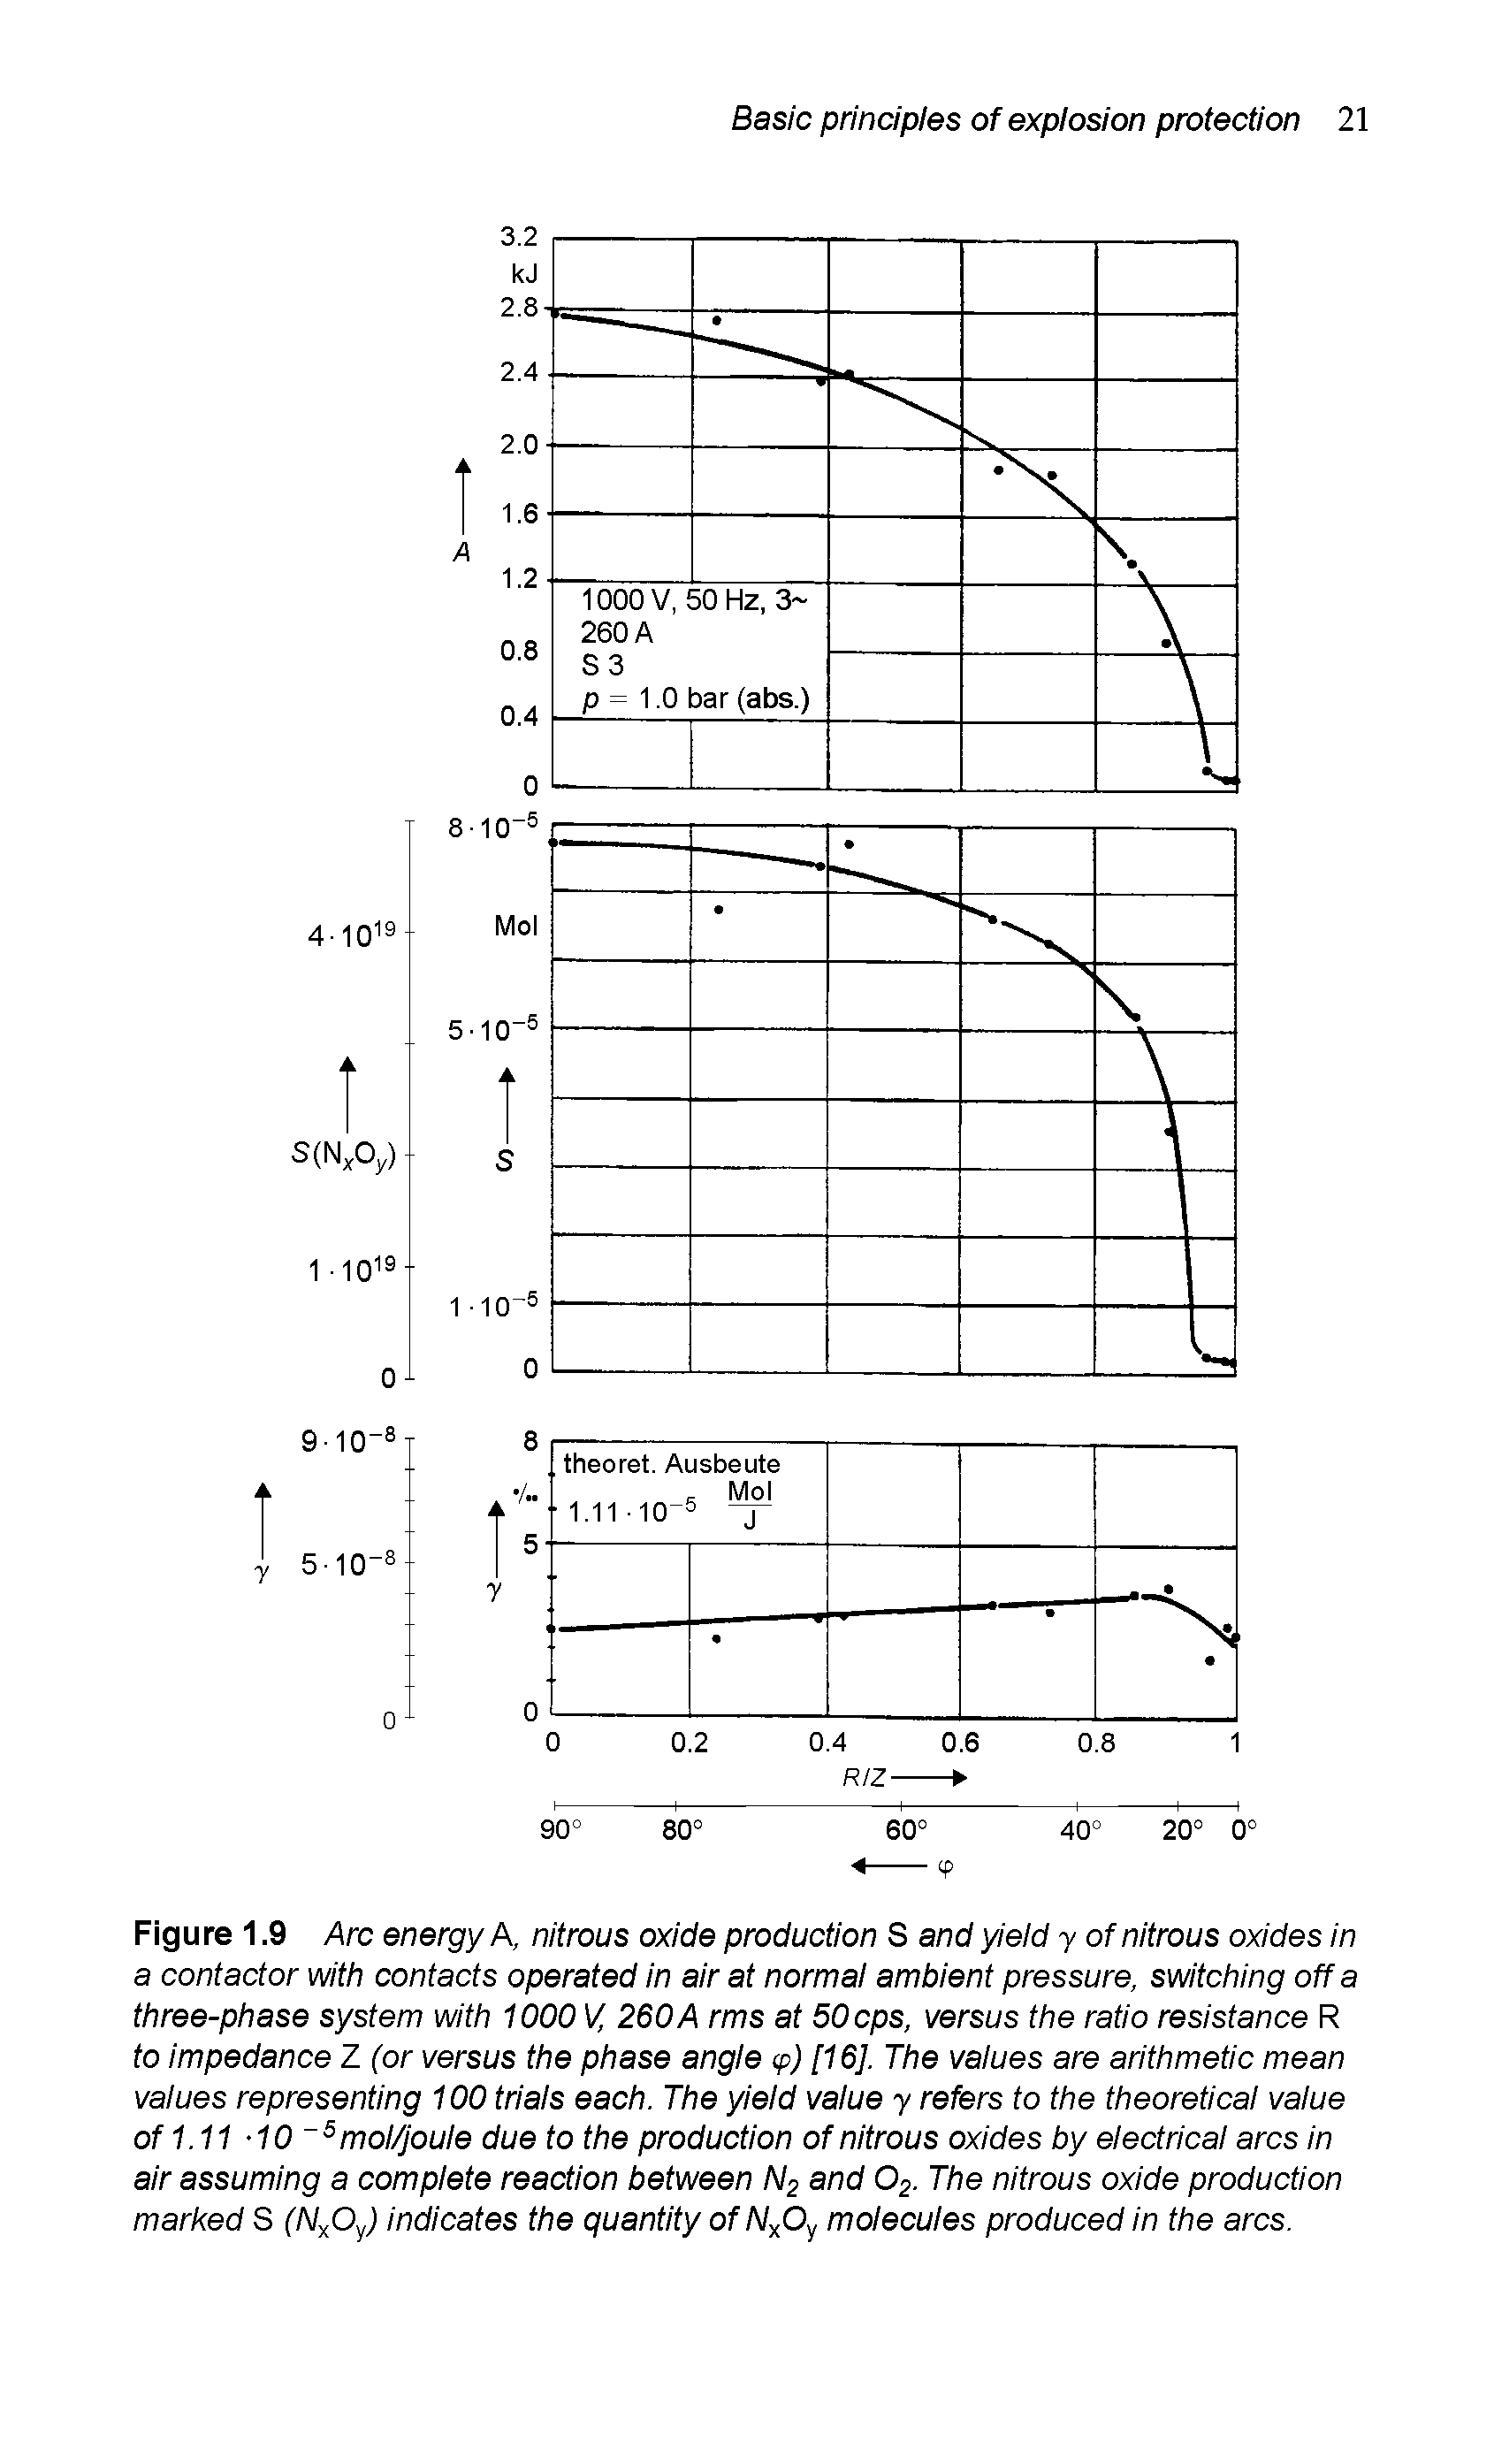 Figure 1.9 Arc energy A, nitrous oxide production S and yield y of nitrous oxides in a contactor with contacts operated in air at normal ambient pressure, switching off a three-phase system with 1000 V, 260A rms at 50cps, versus the ratio resistance R to impedance Z (or versus the phase angle <p) [16]. The values are arithmetic mean values representing 100 trials each. The yield value y refers to the theoretical value of 1.11 10 5mol/joule due to the production of nitrous oxides by electrical arcs in air assuming a complete reaction between N2 and 02. The nitrous oxide production marked S (IVxOyj indicates the quantity of NyOy molecules produced in the arcs.